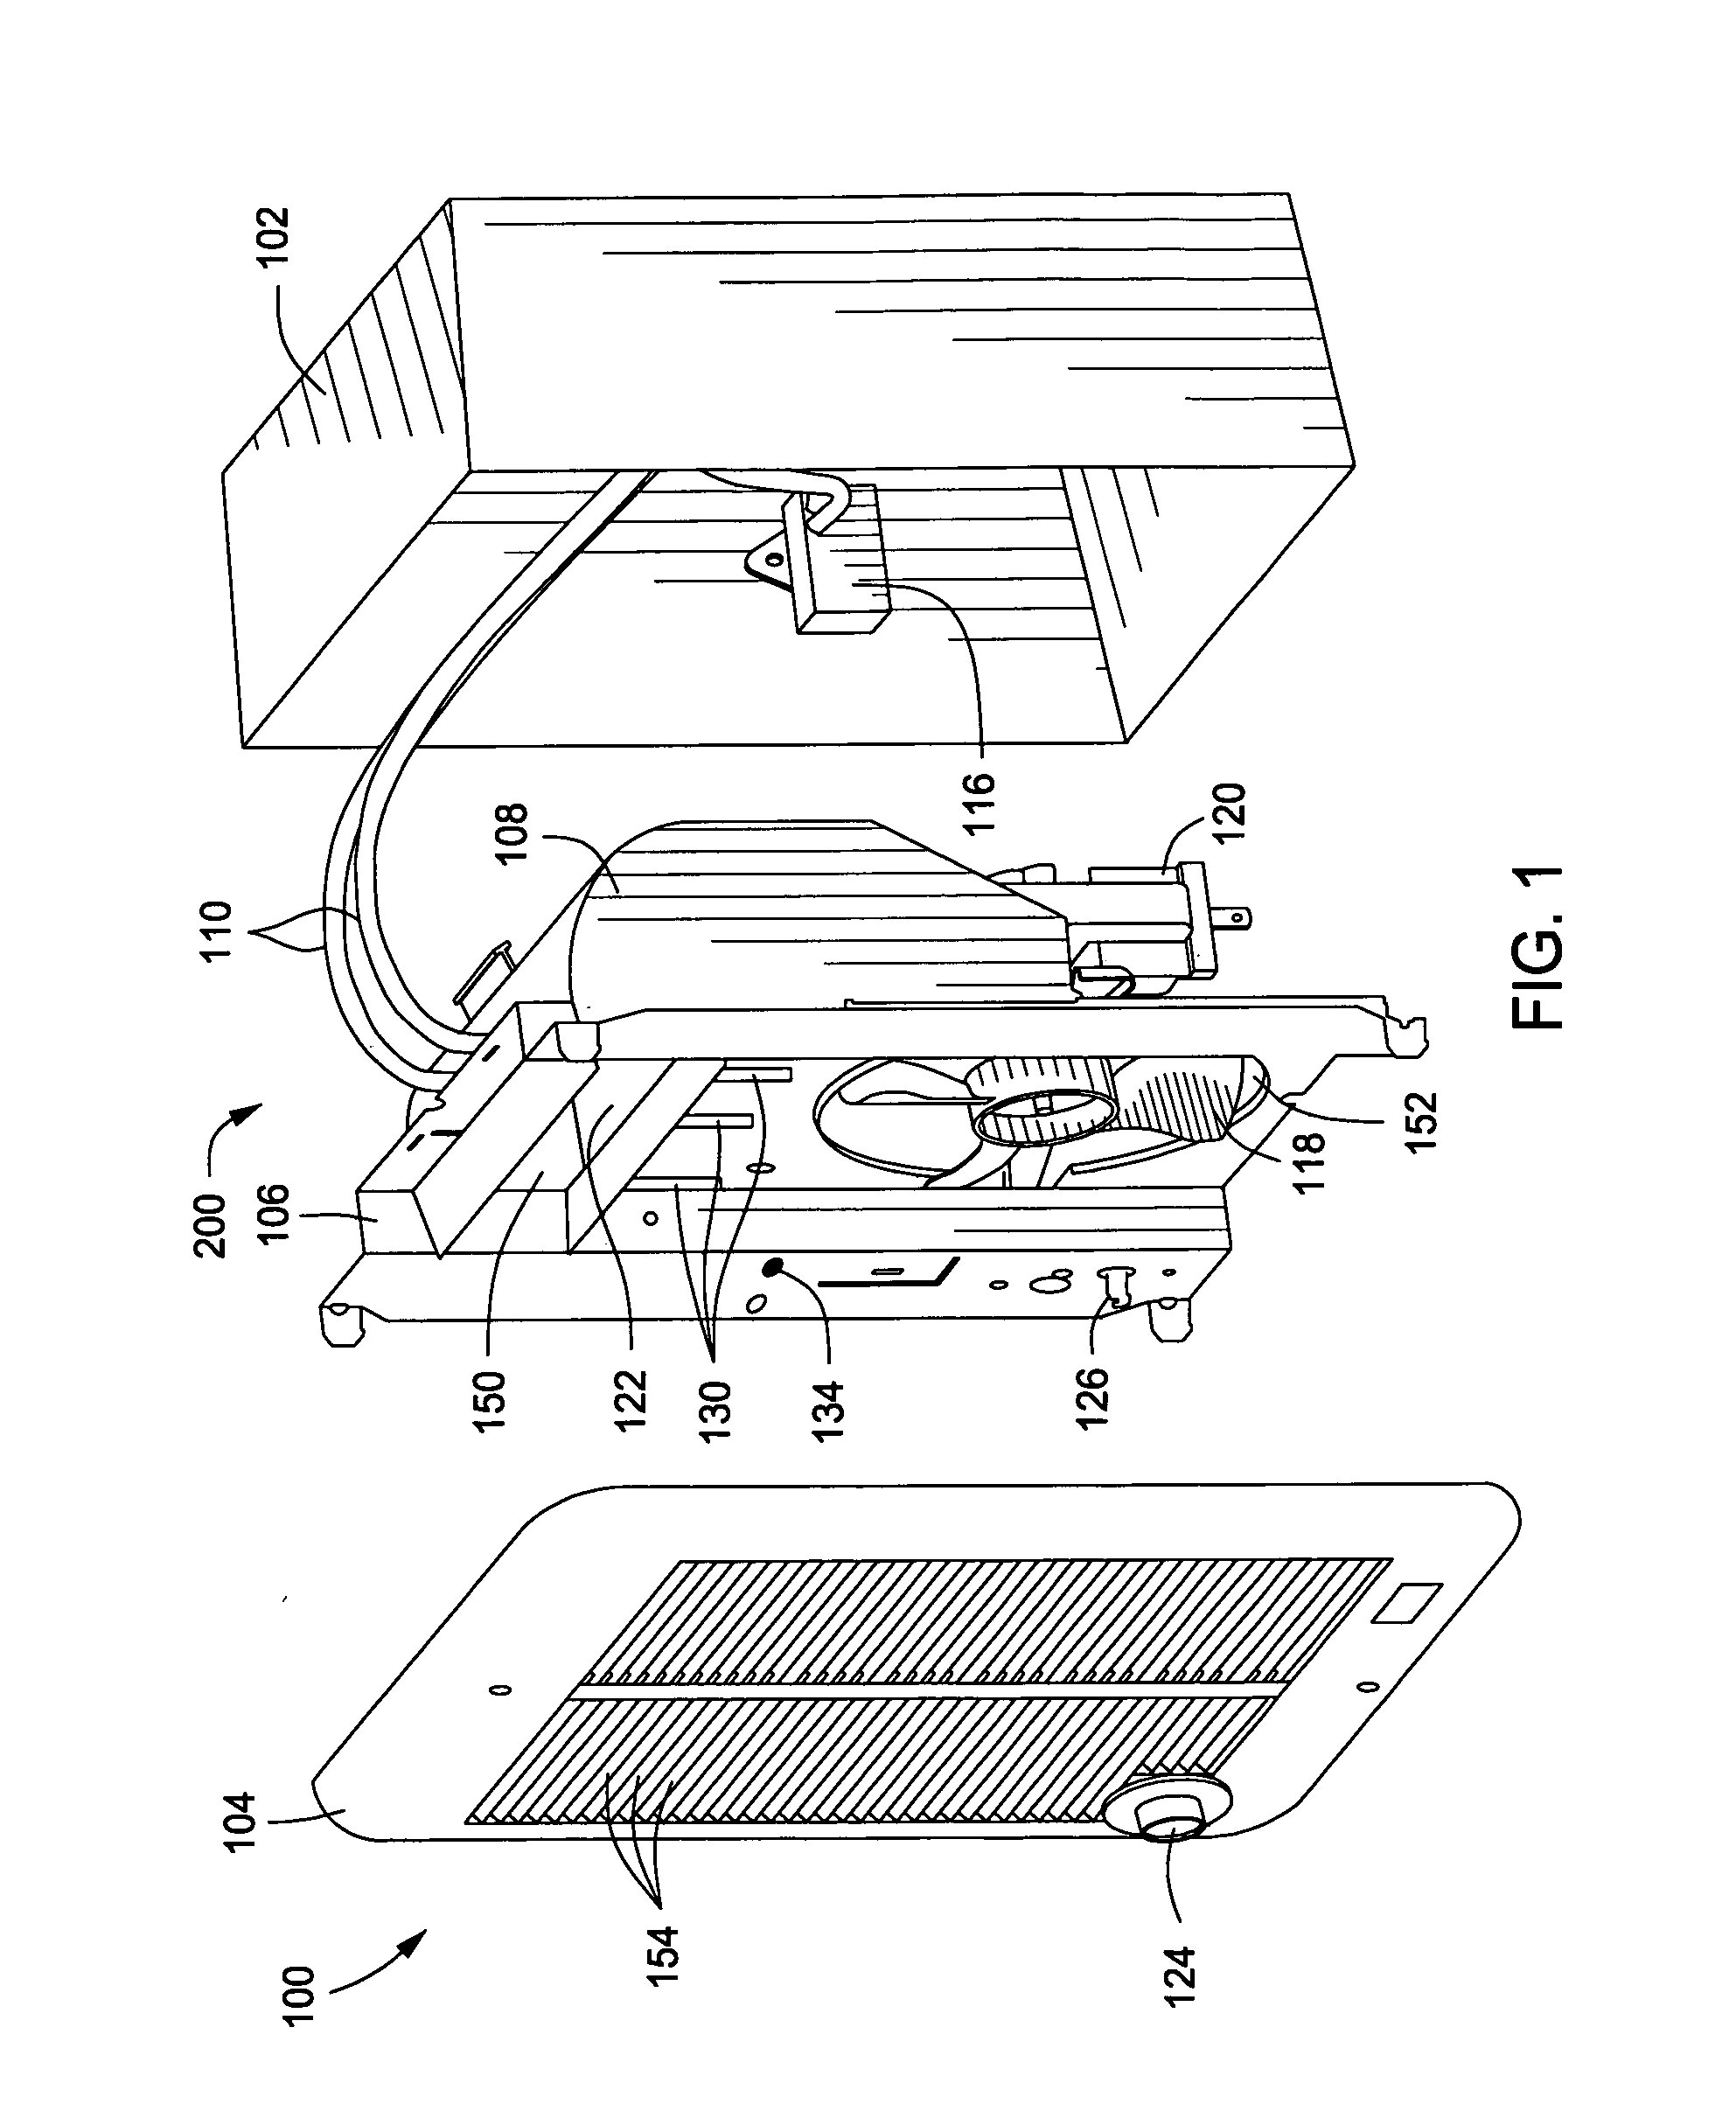 Fan forced electric unit that incorporates a low power cold plasma generator and method of making same